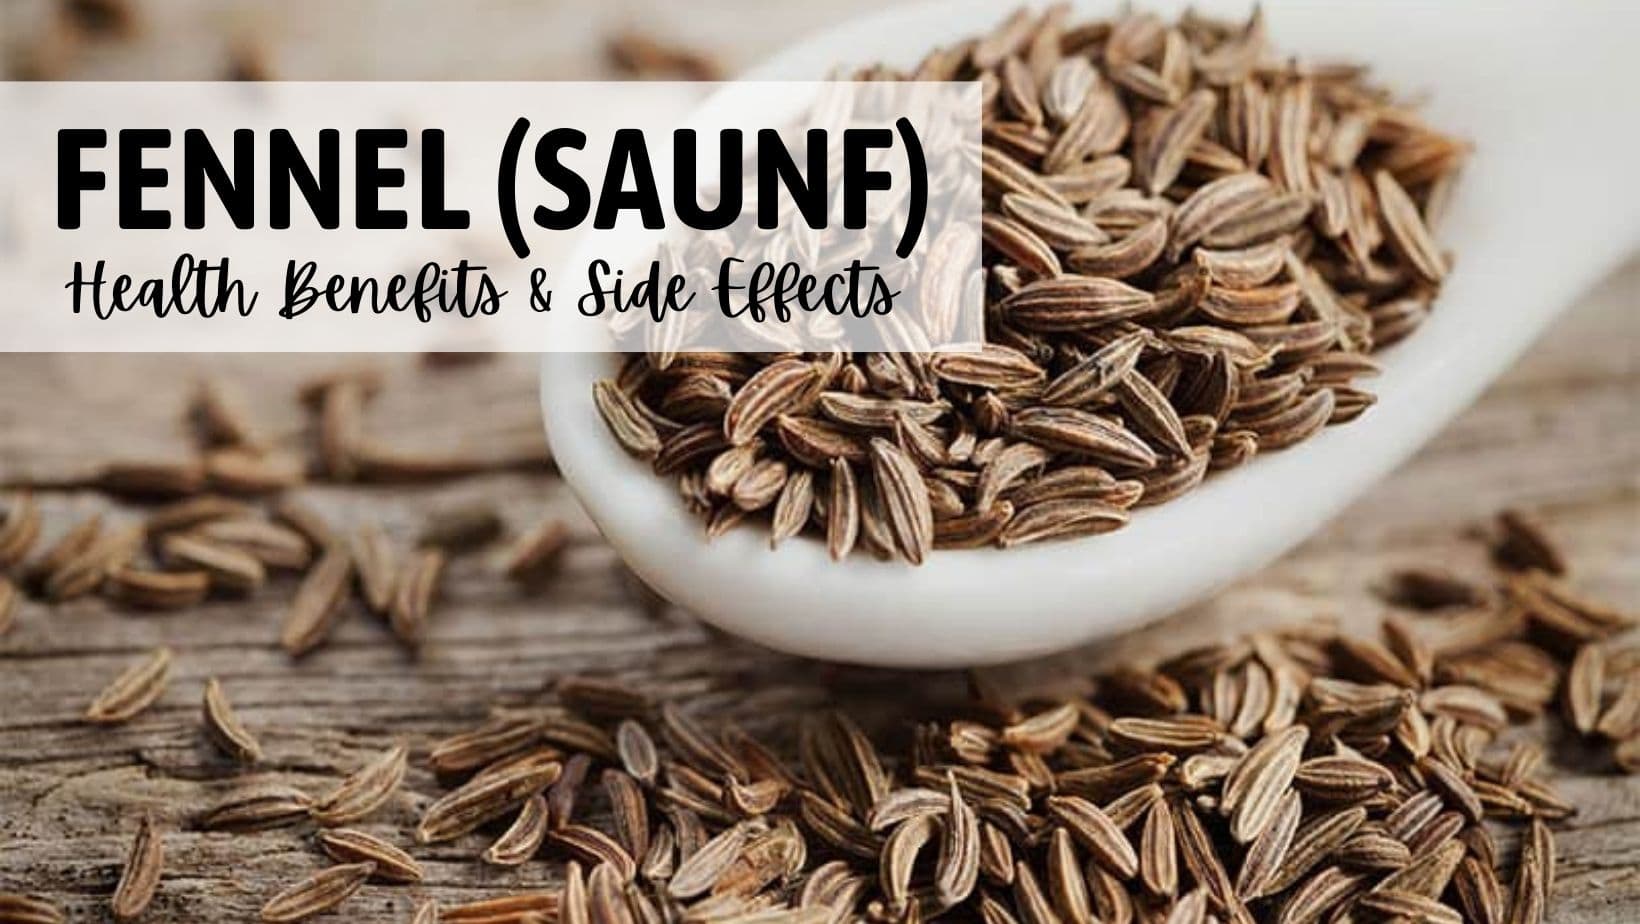 Fennel (Saunf): Health Benefits, Uses, Side Effects And More |  